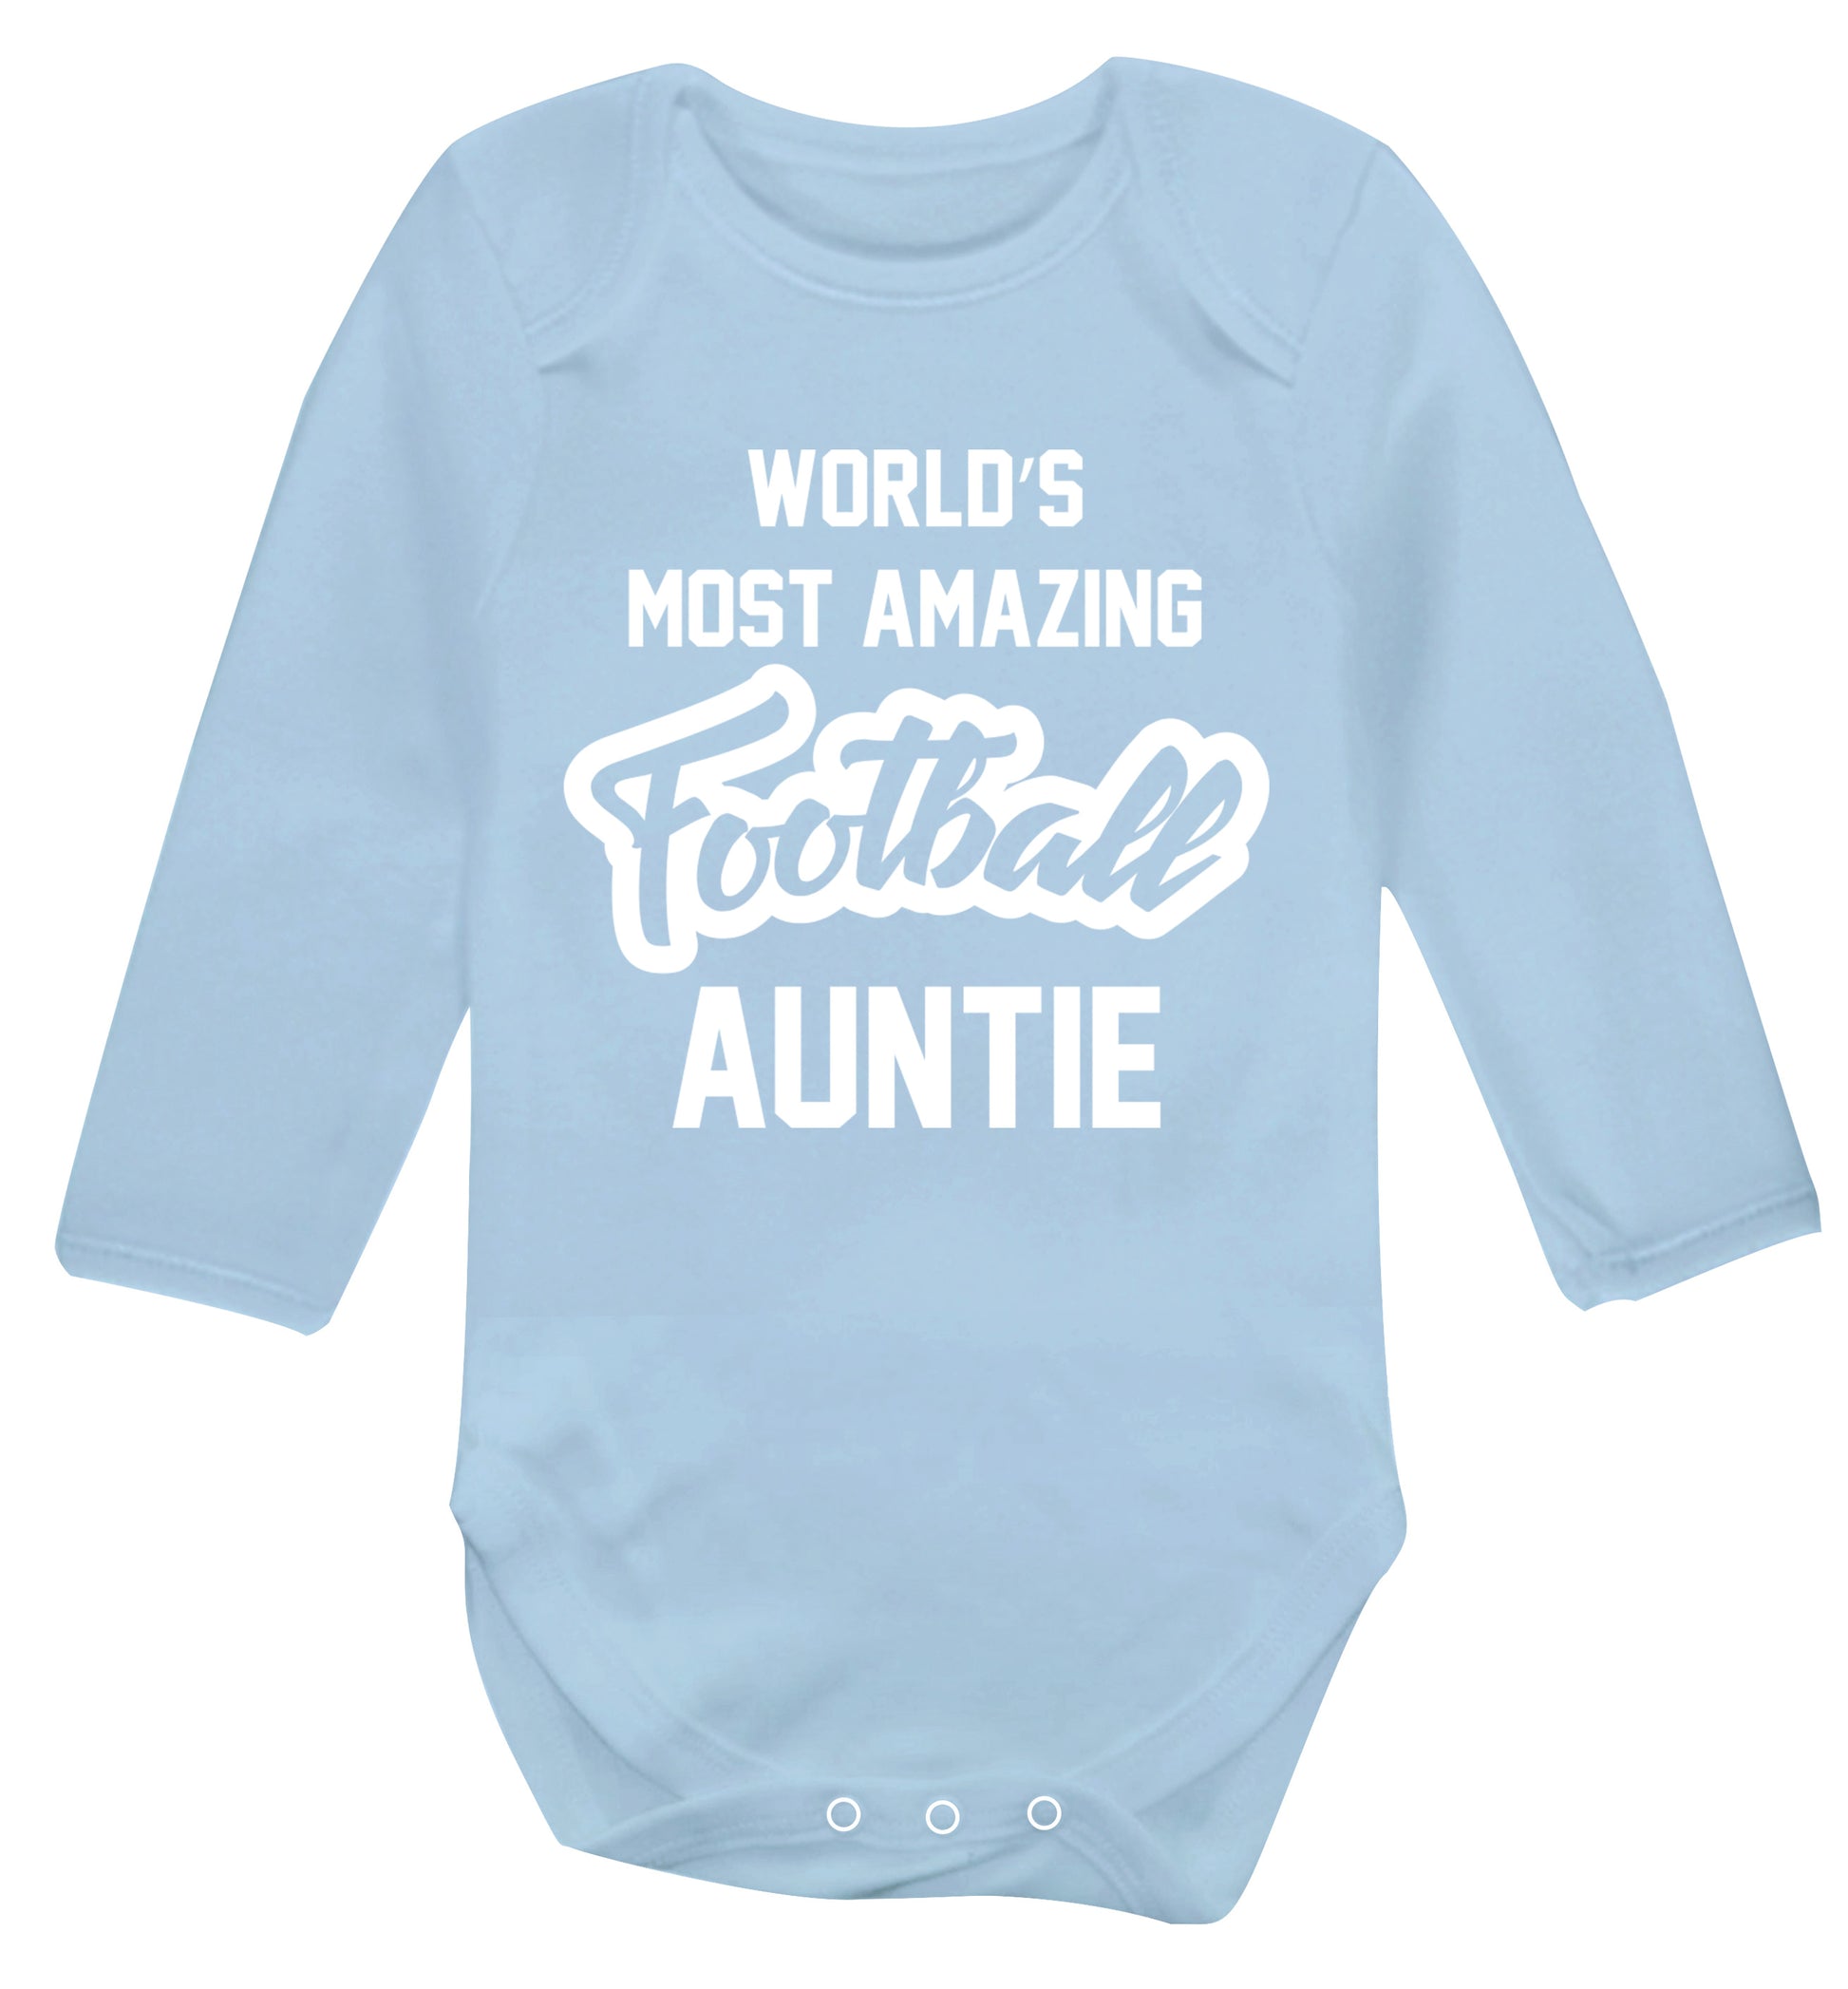 Worlds most amazing football auntie Baby Vest long sleeved pale blue 6-12 months